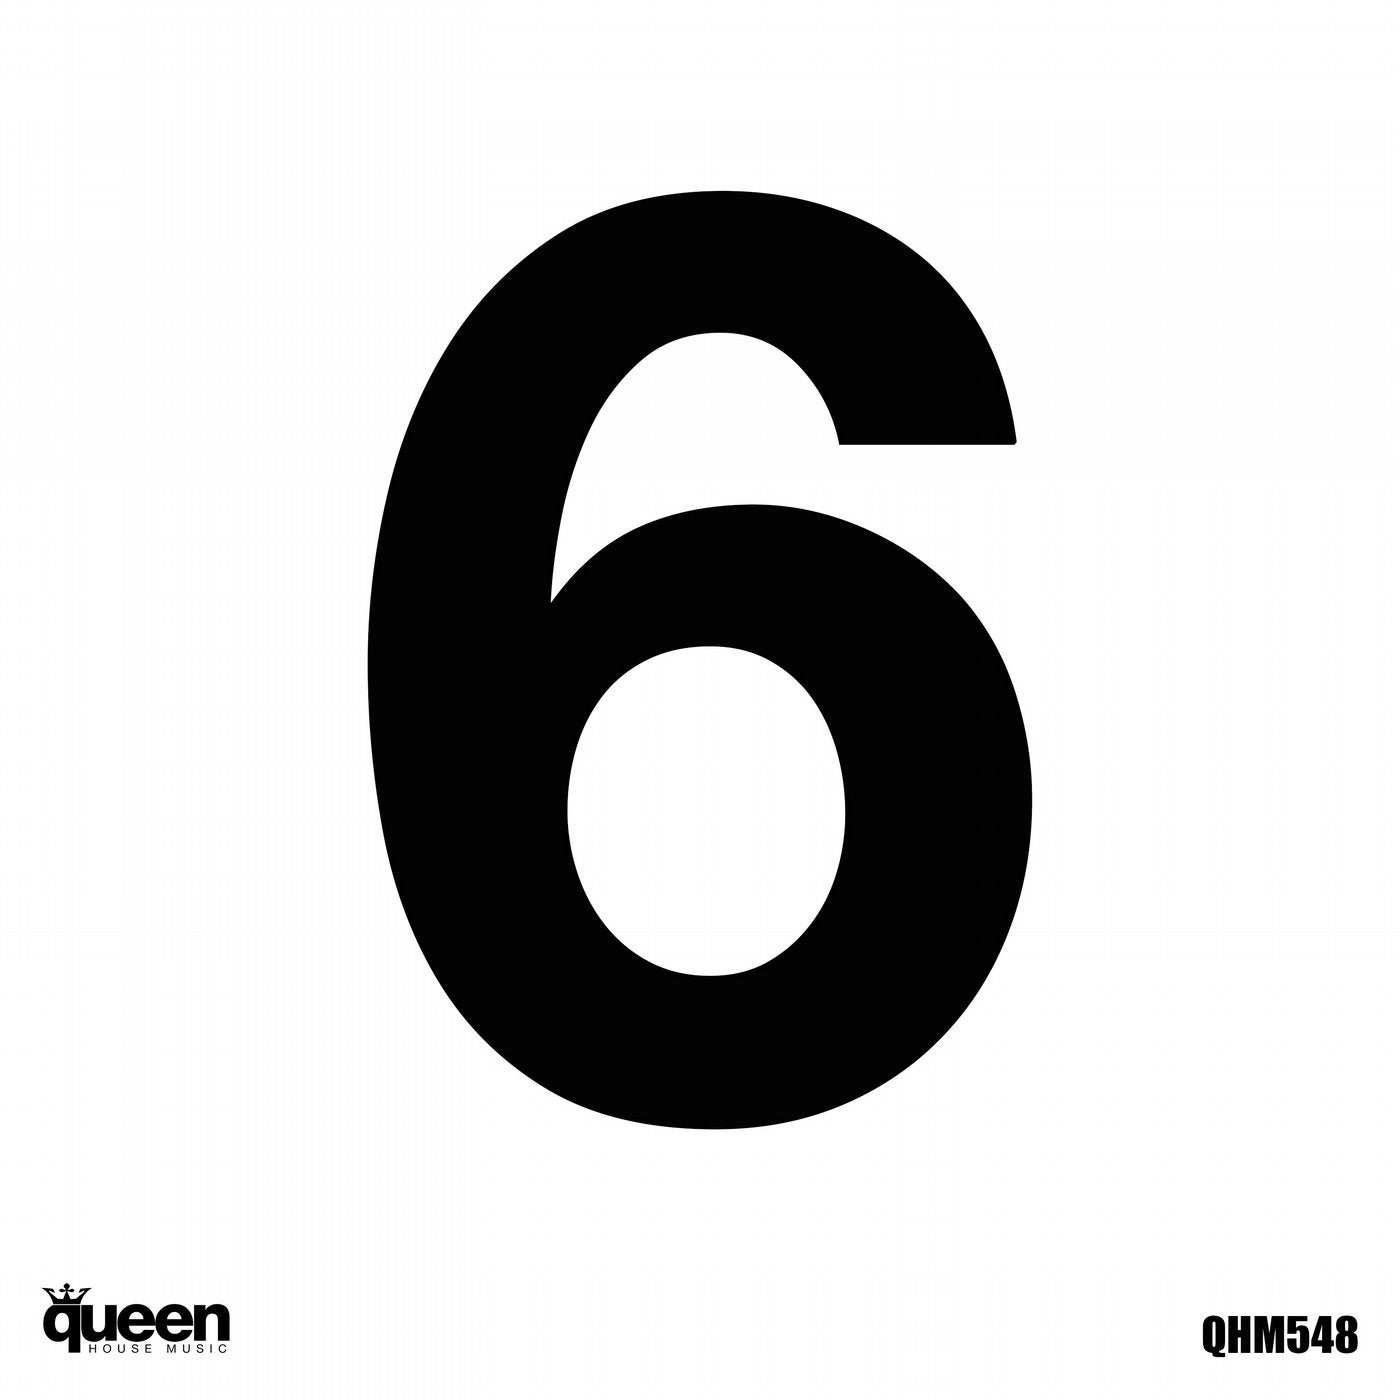 6 Years of Queen House Music